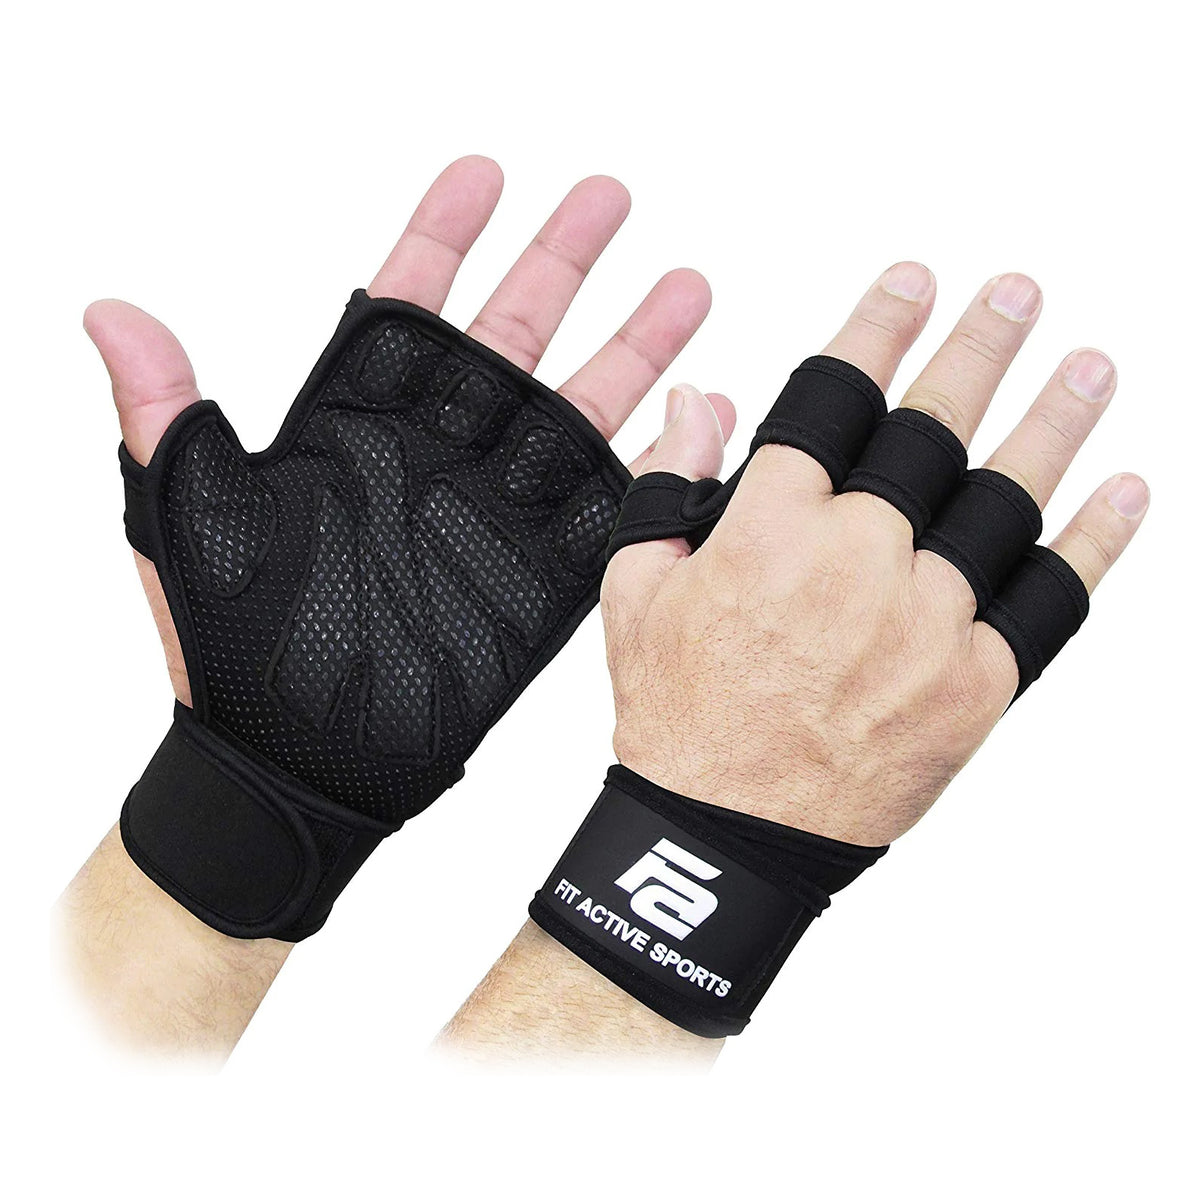 Details about   Mava Sports Ventilated Workout Gloves with Integrated Wrist Wraps and Full Pa... 